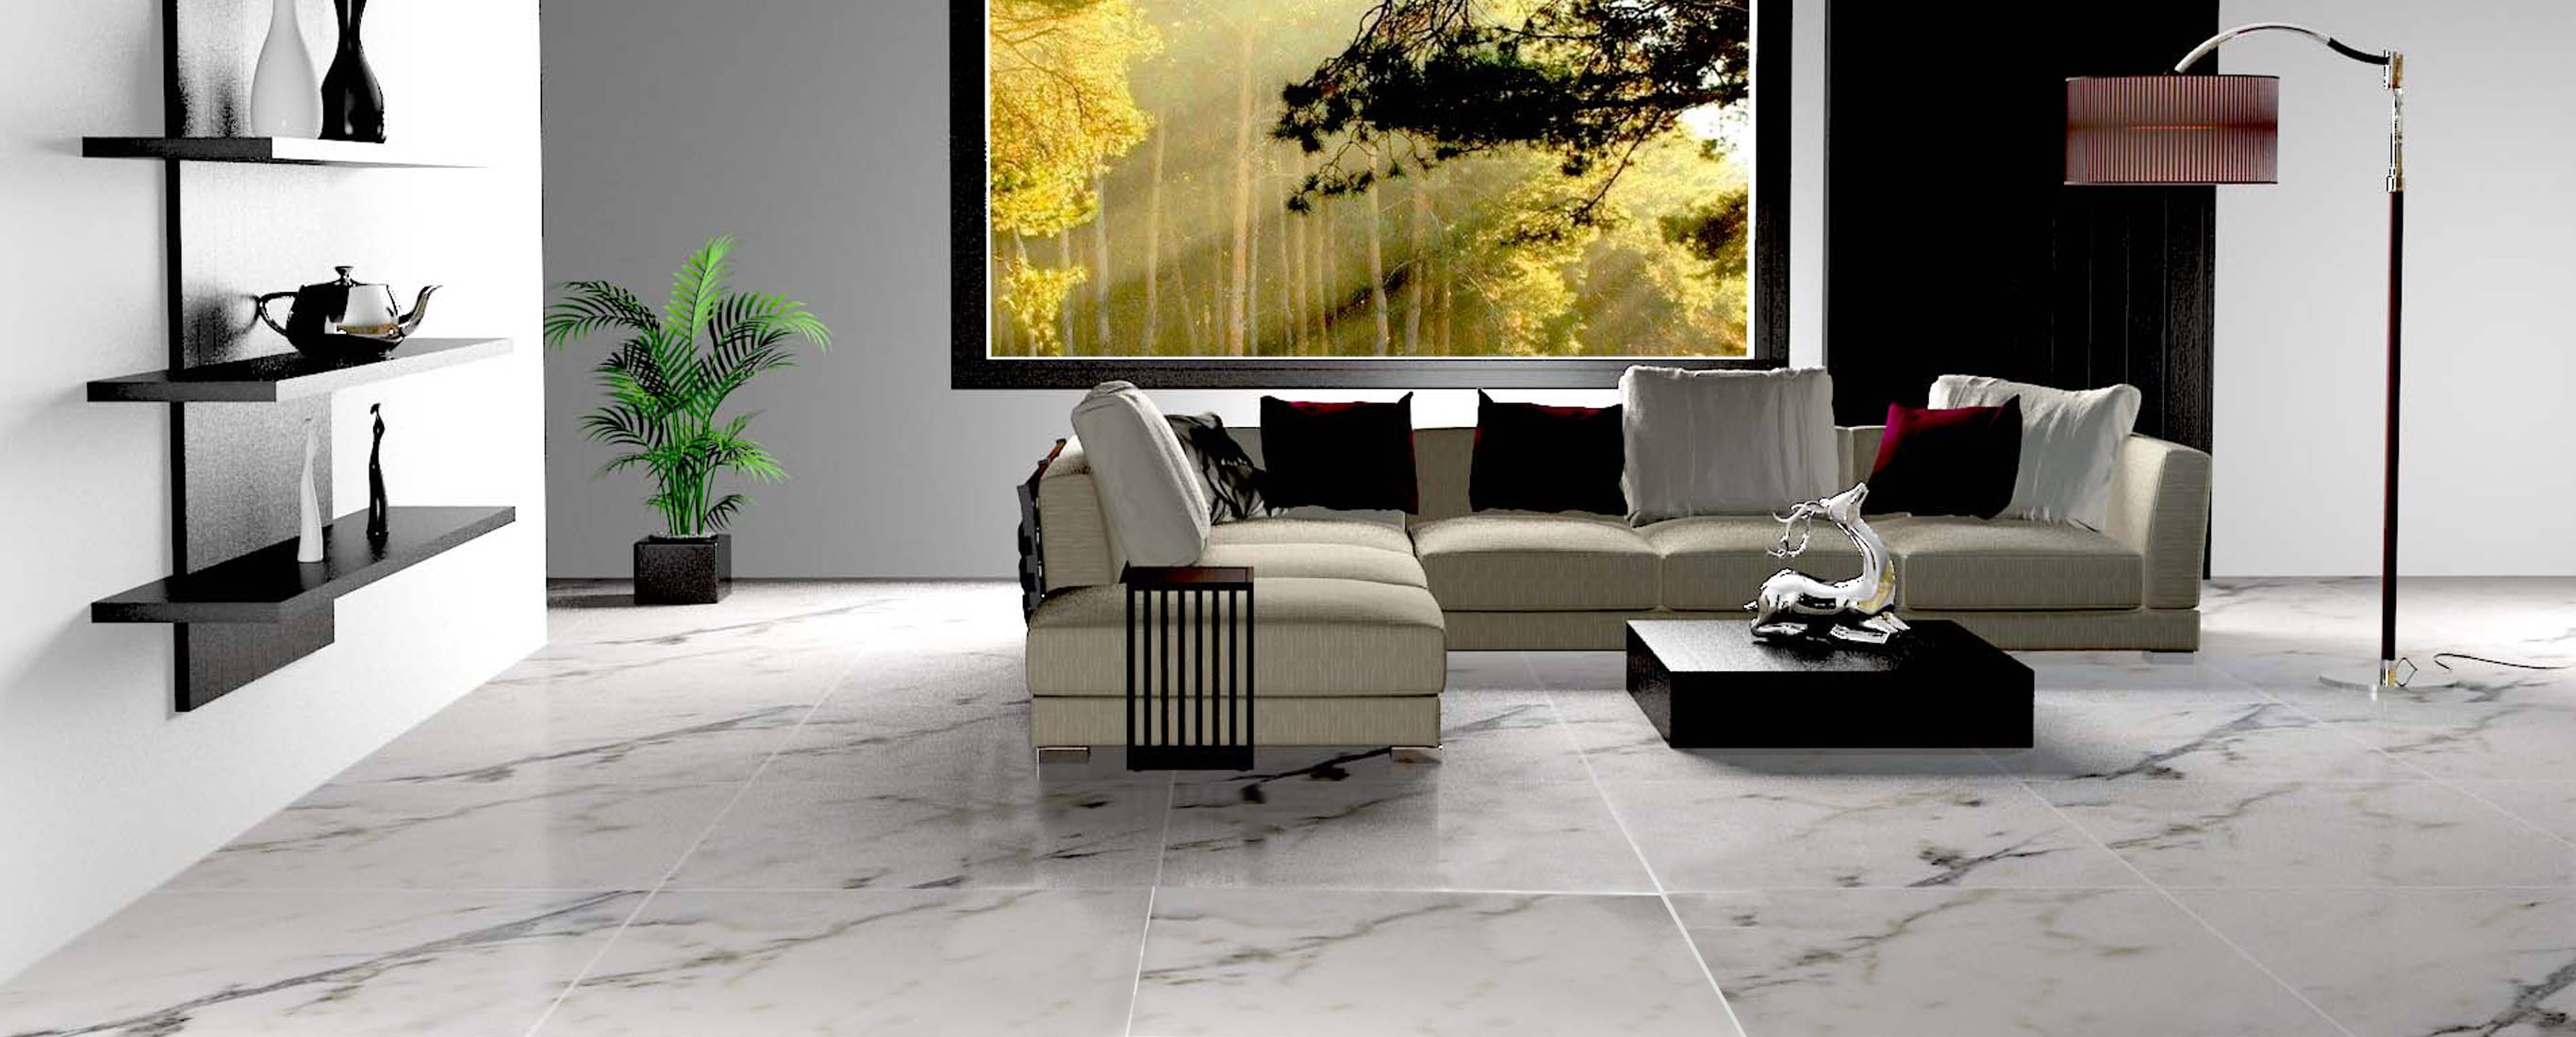 Why Should You Choose Marble Tiles for Your Home?